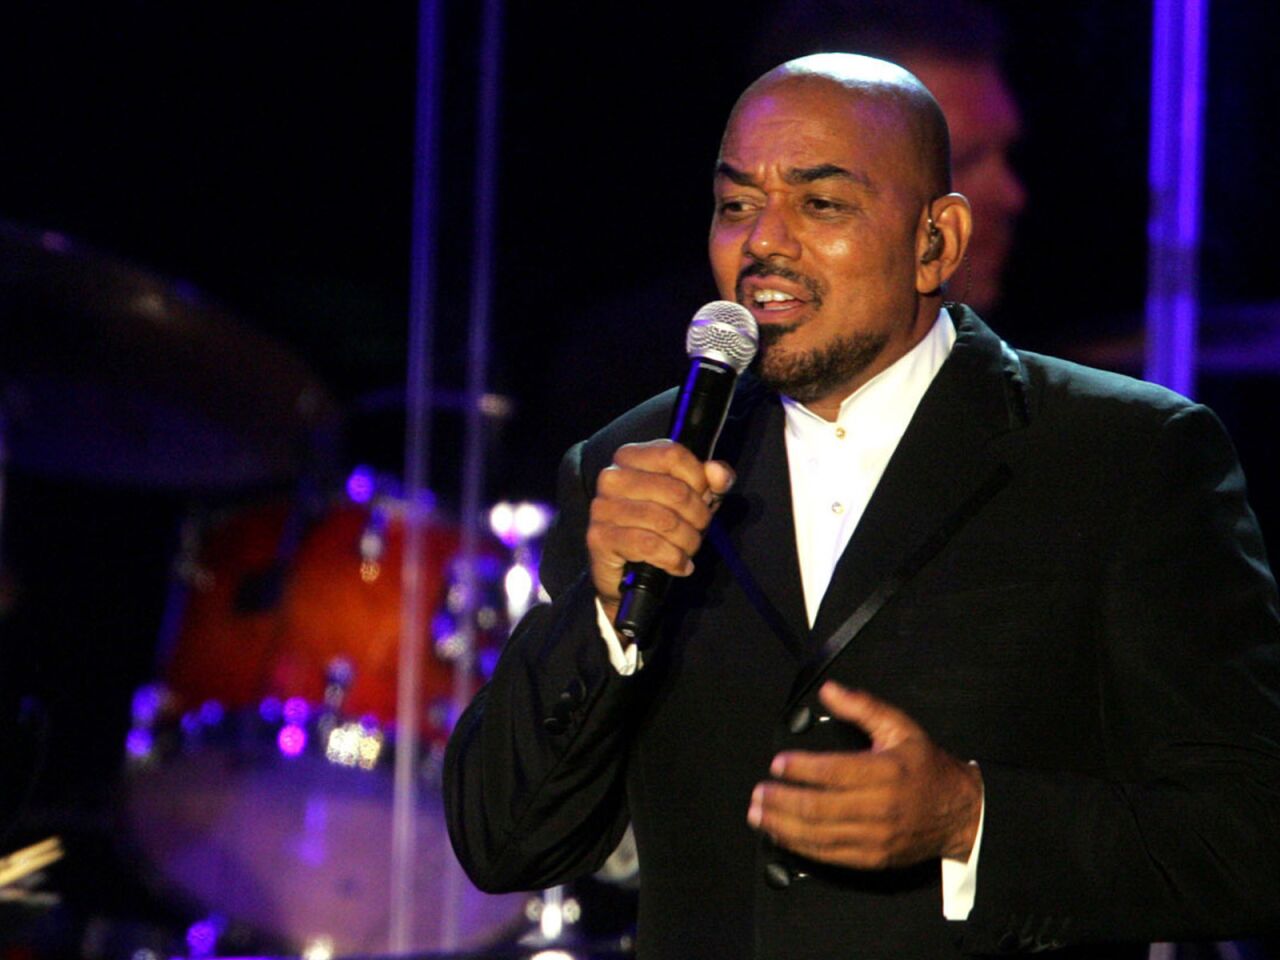 Grammy-winning singer and songwriter James Ingram topped the charts in the '80s with hits like “Baby, Come to Me” and “Somewhere Out There.” He also co-wrote the Michael Jackson hit “P.Y.T. (Pretty Young Thing).” He was 66.